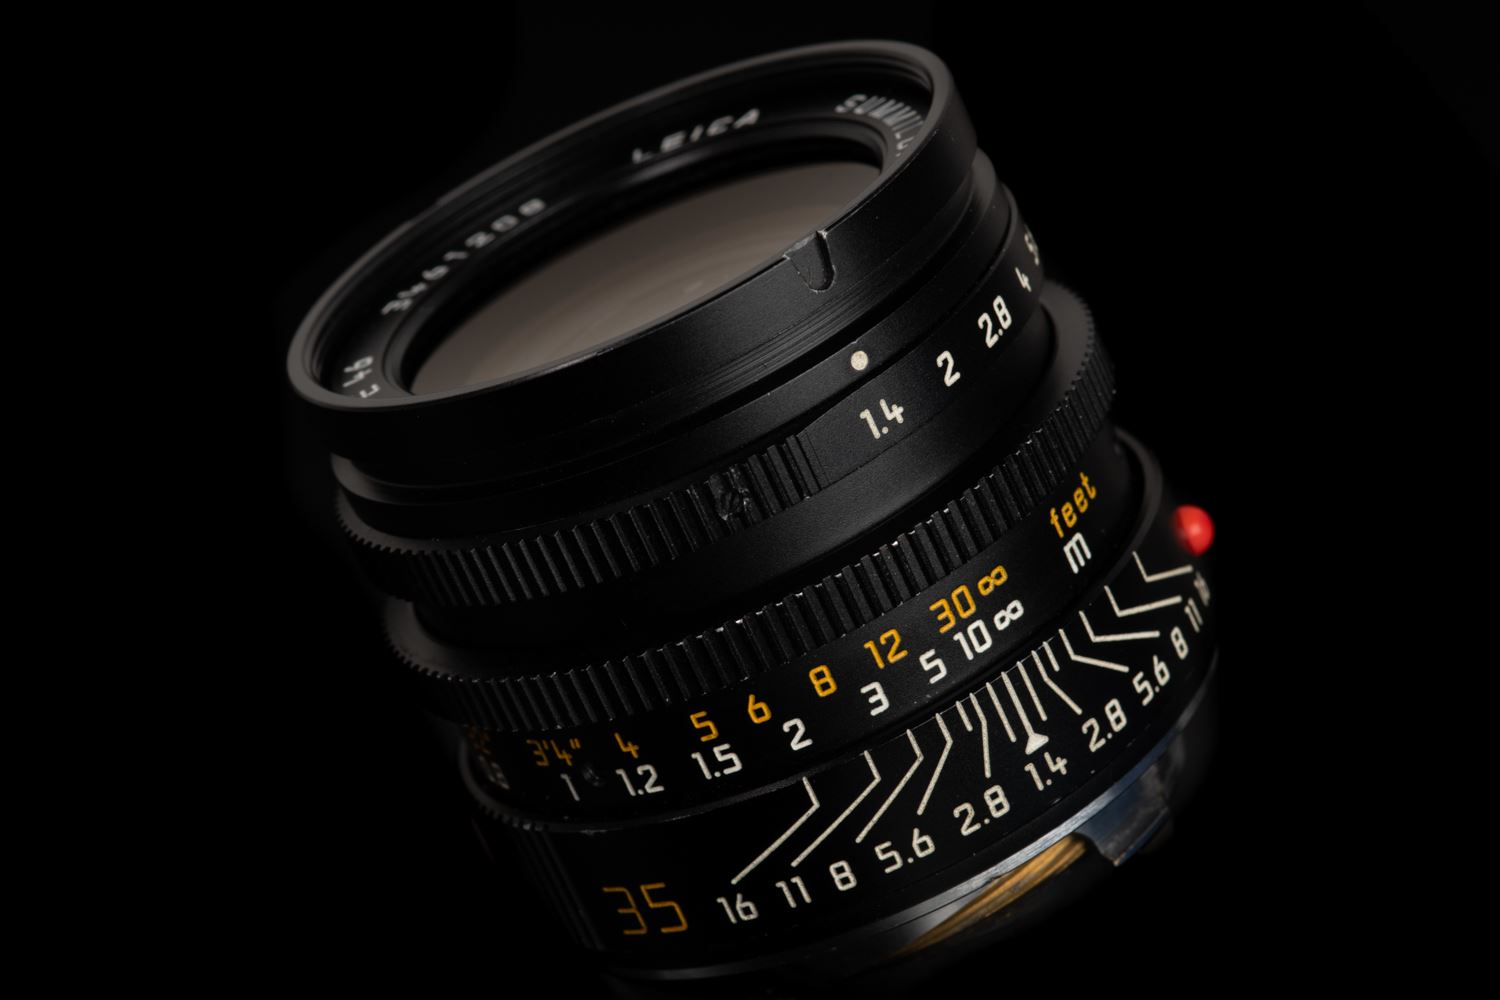 Picture of Leica Summilux-M 35mm f/1.4 ASPHERICAL Double ASPH